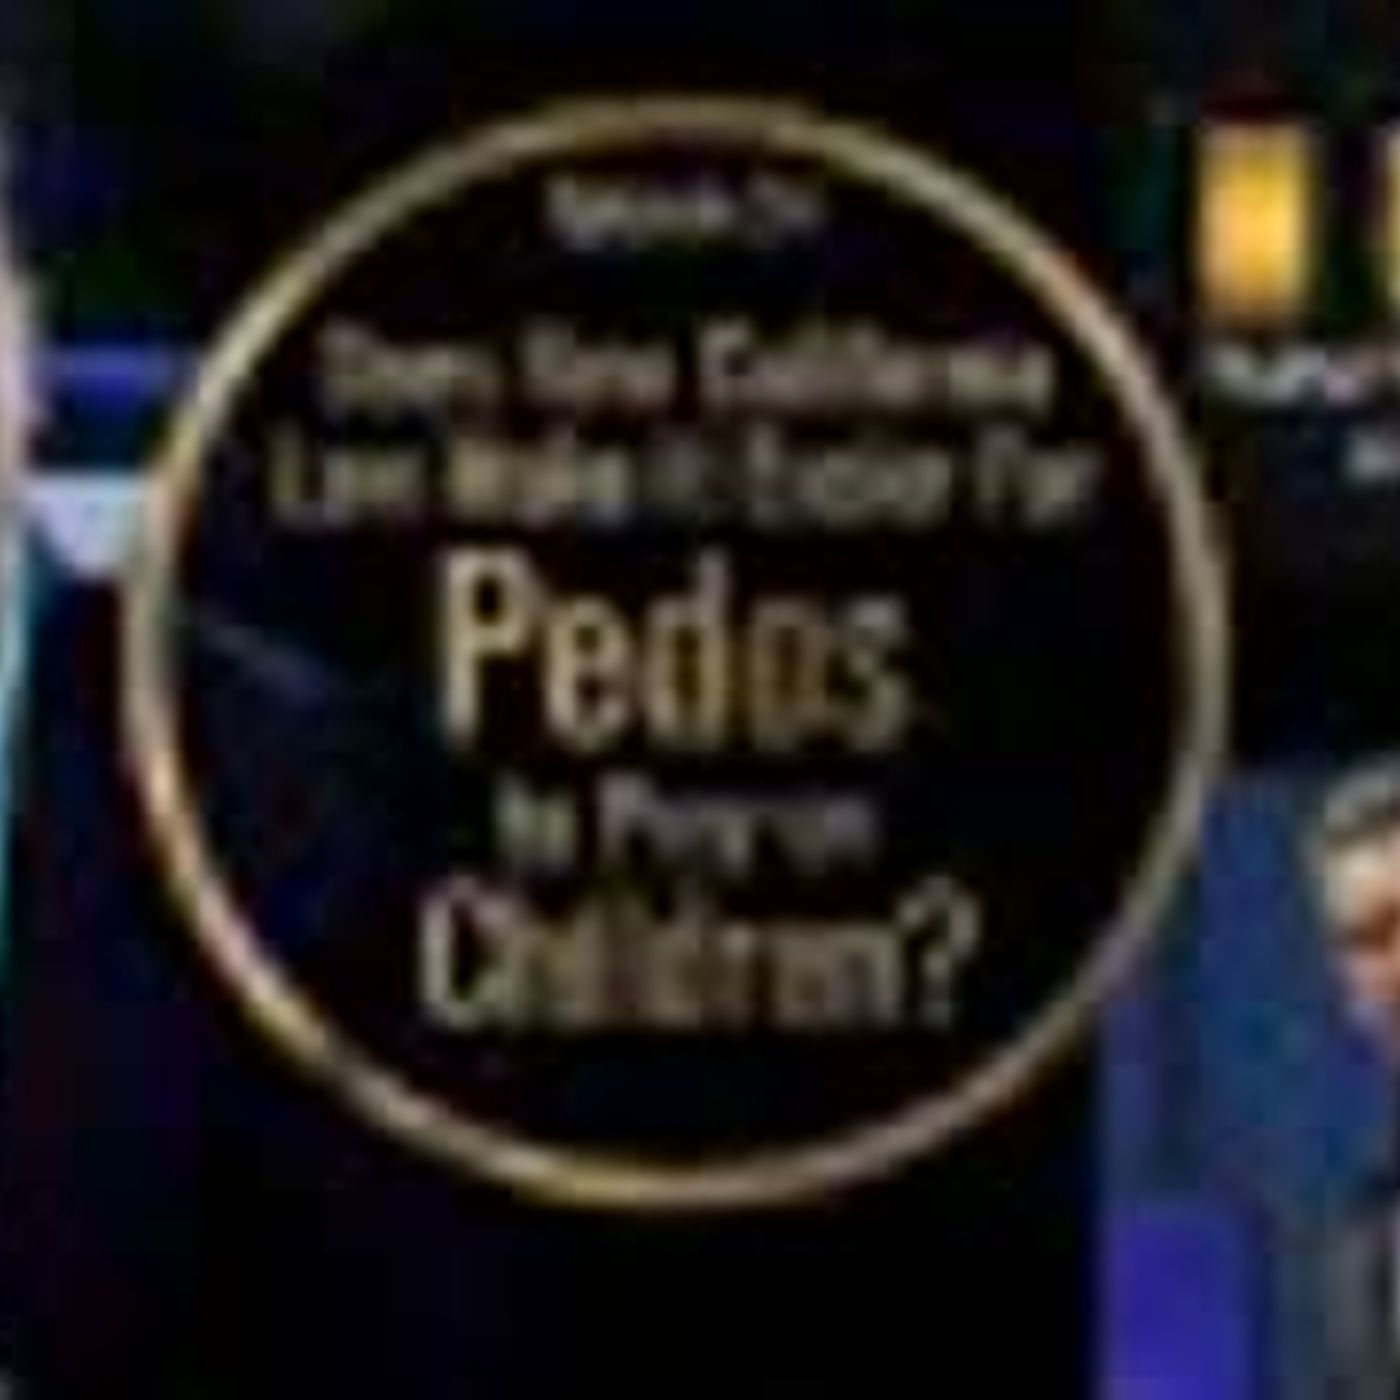 Does New California Law Make It Easier For Pedos to Prey on Children